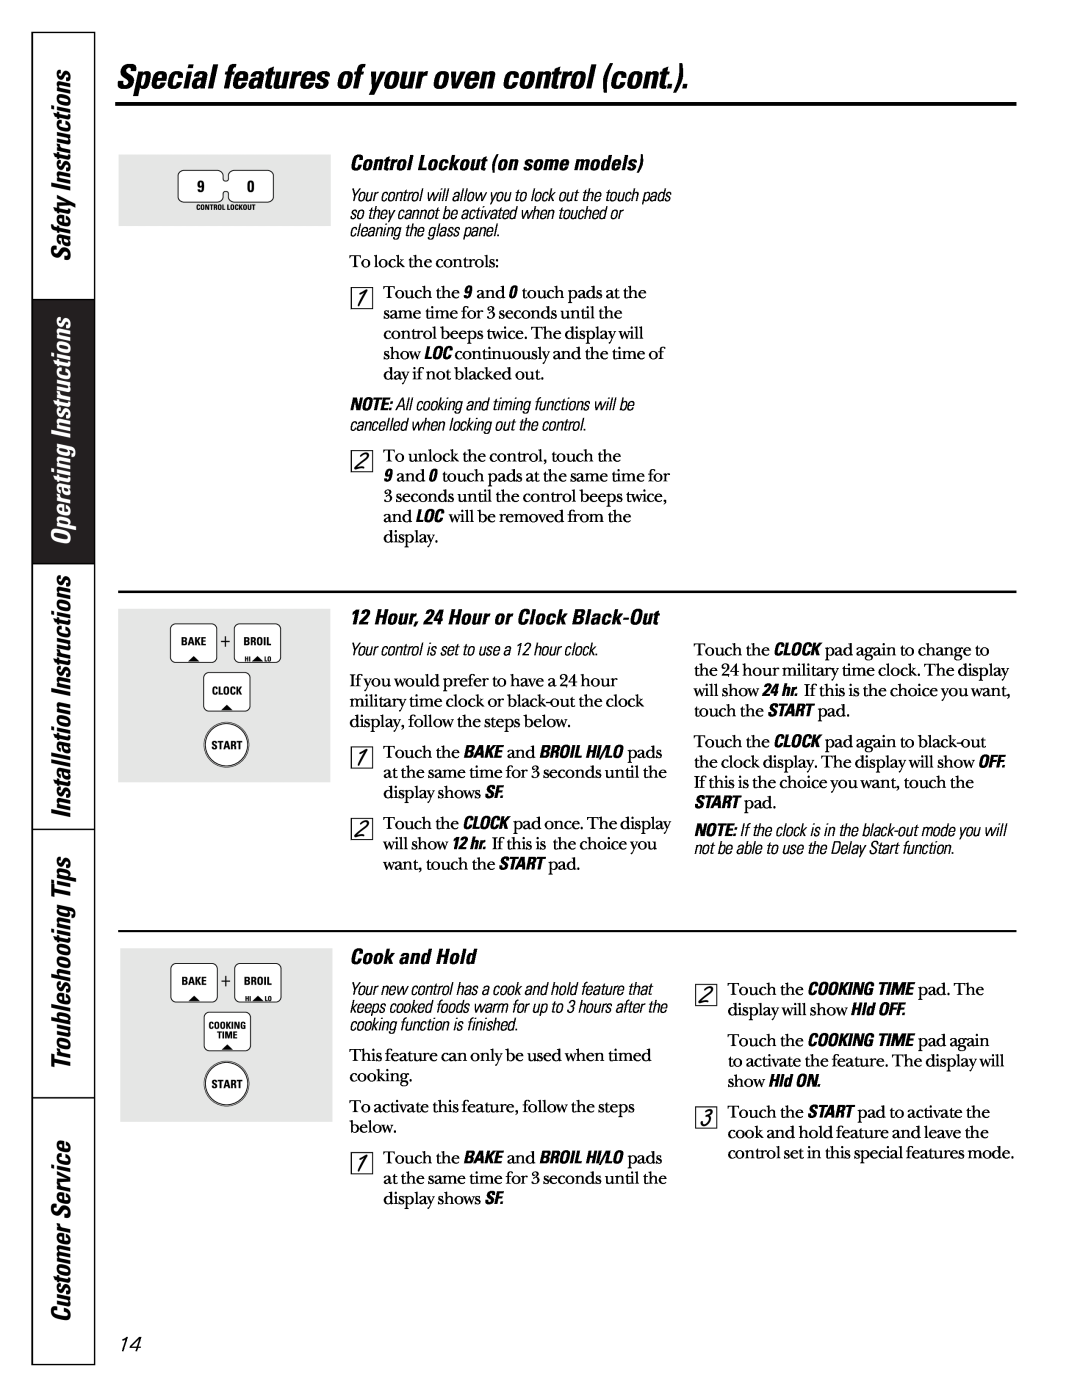 GE JCB920 Special features of your oven control cont, Operating Instructions Safety Instructions, Tips, Troubleshooting 